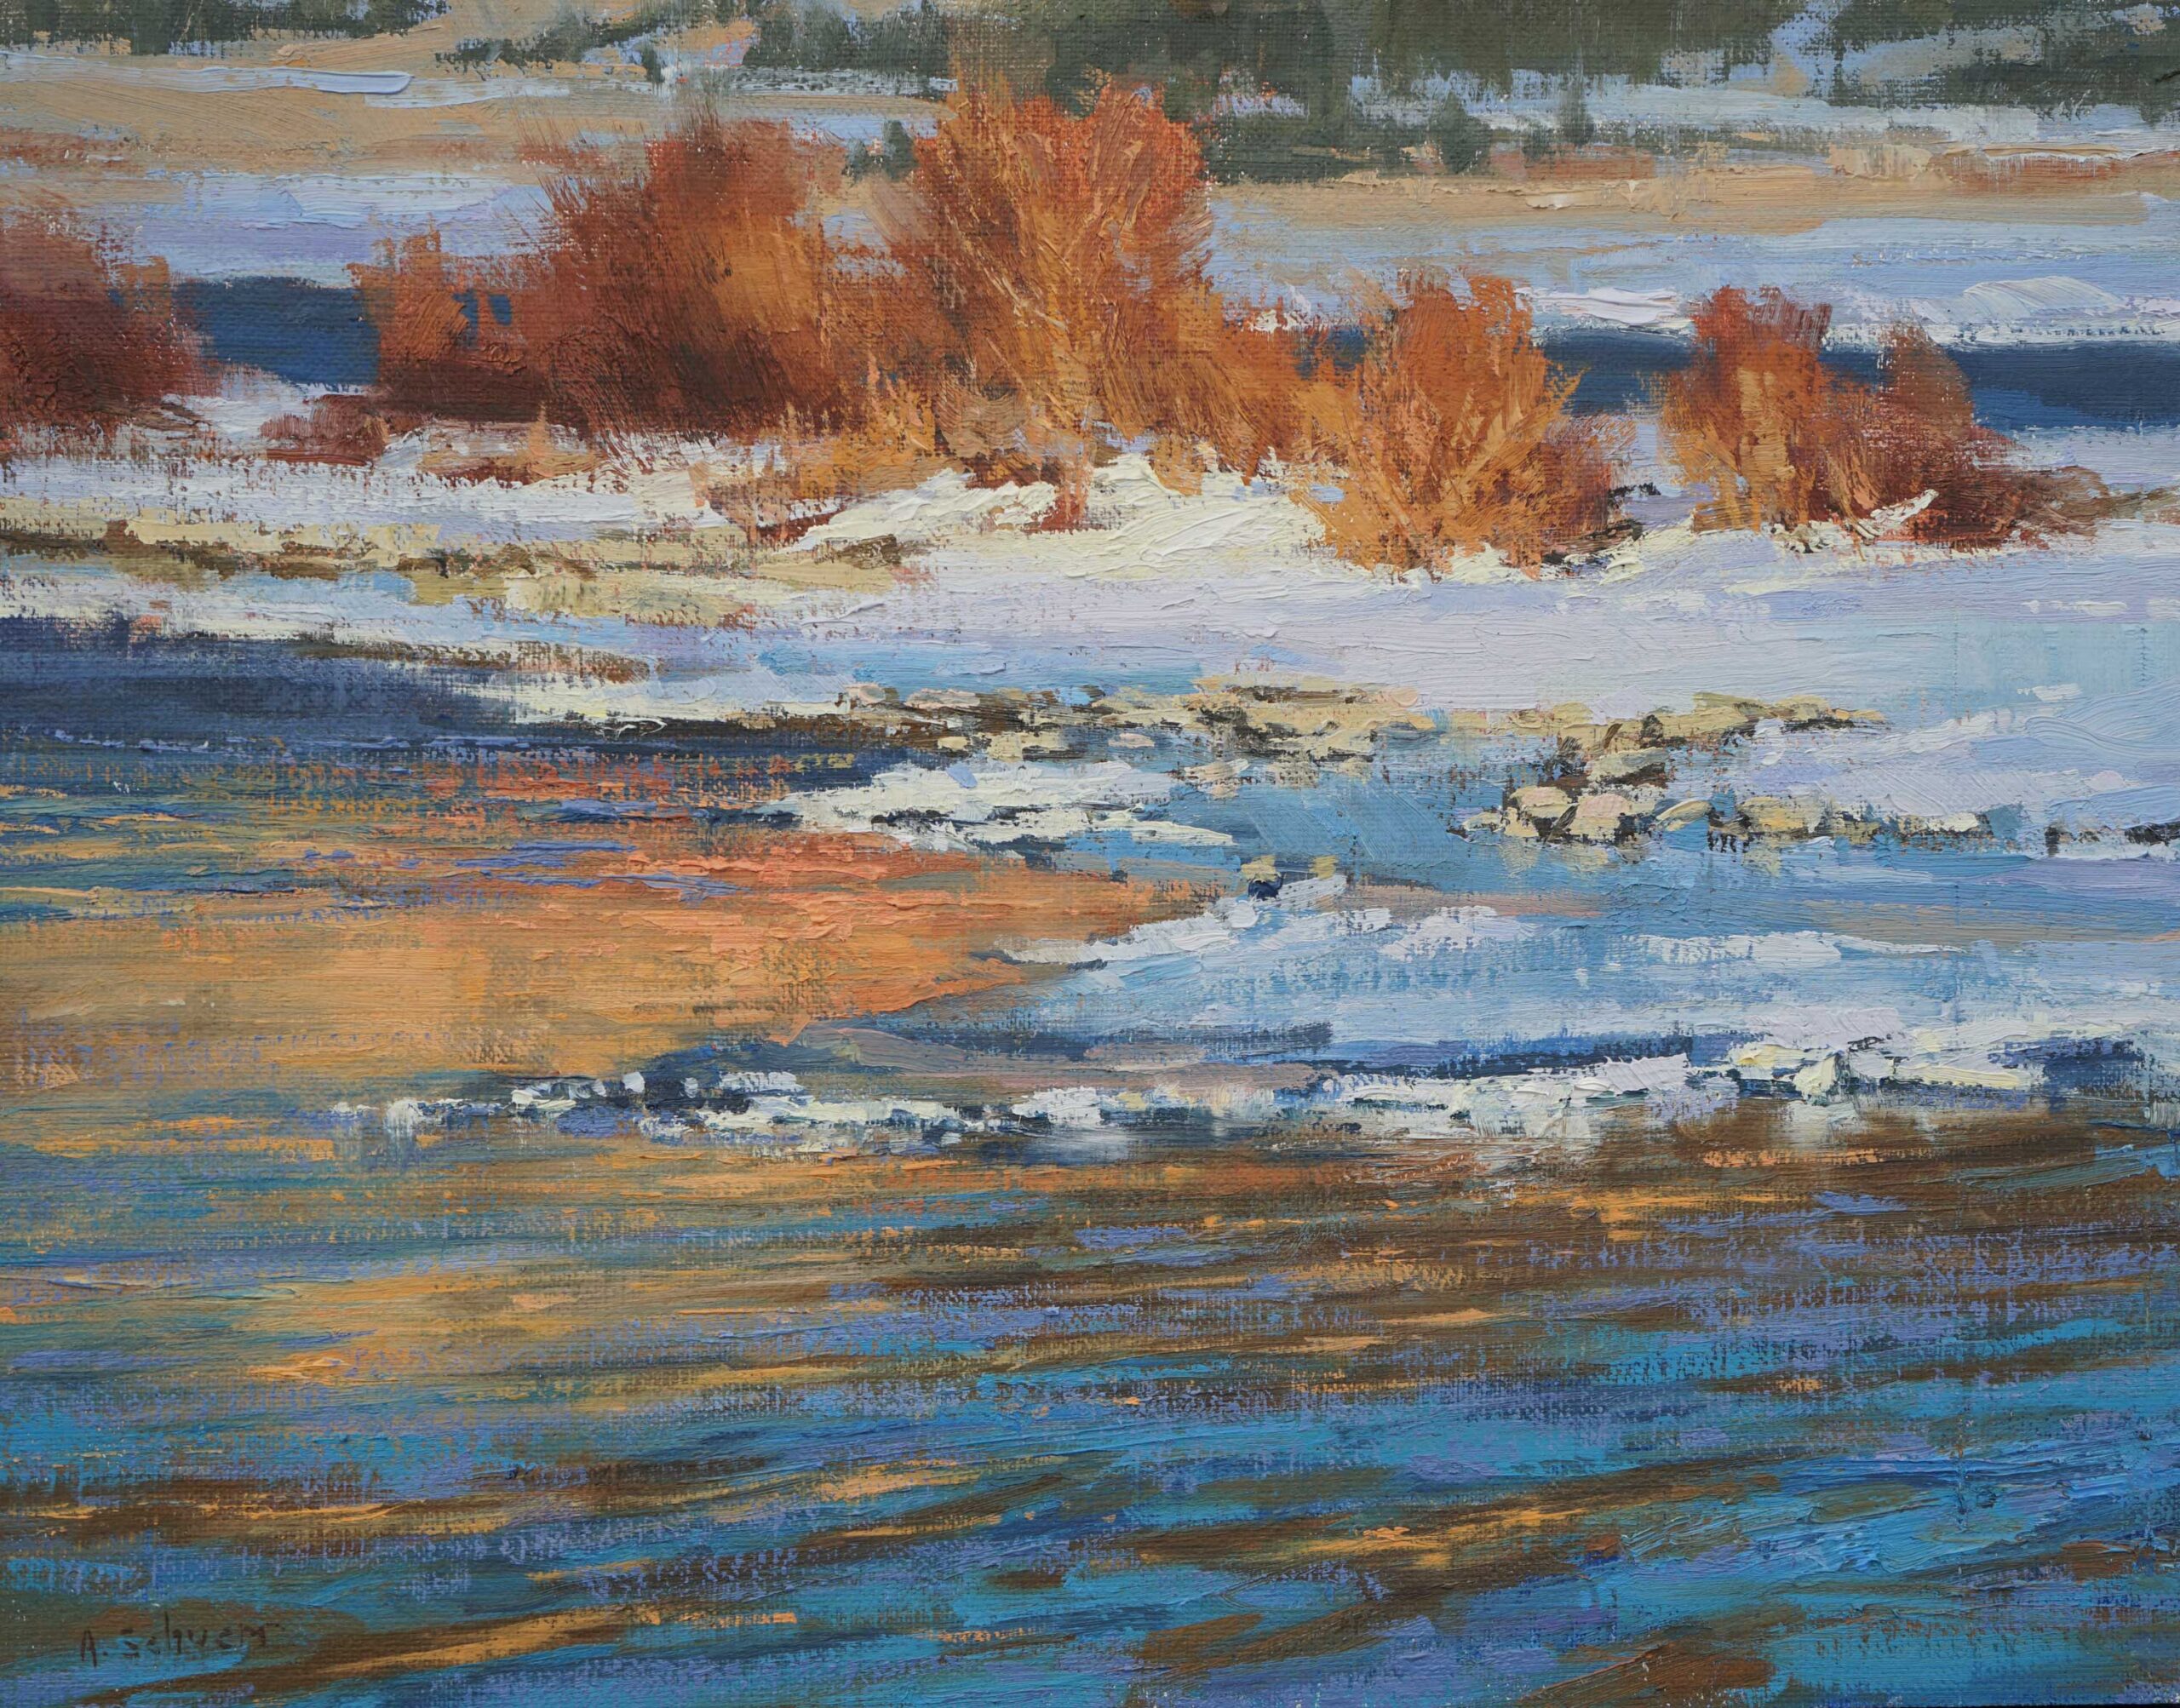 Aaron Schuerr, “Winter Willows,” 2019, oil, 11 x 14 in., Available from Montana Trails Gallery, Bozeman, Montana, Plein air